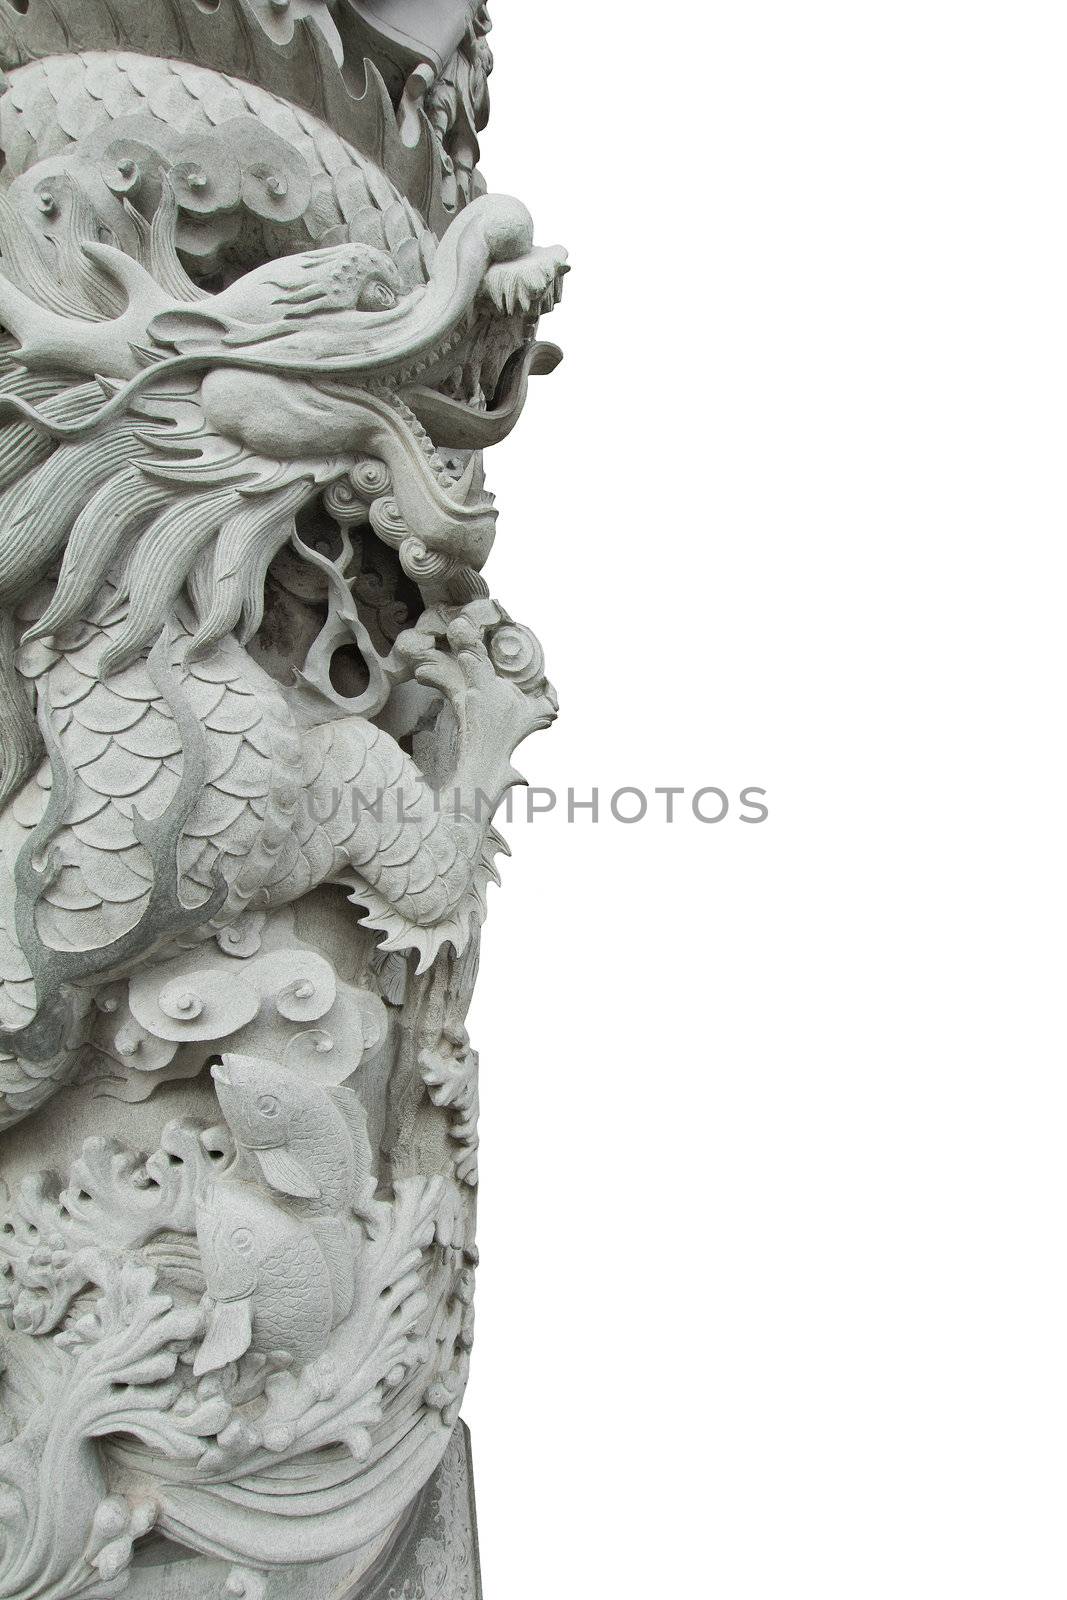 Chinese Dragon Stone Carving Column by jpldesigns